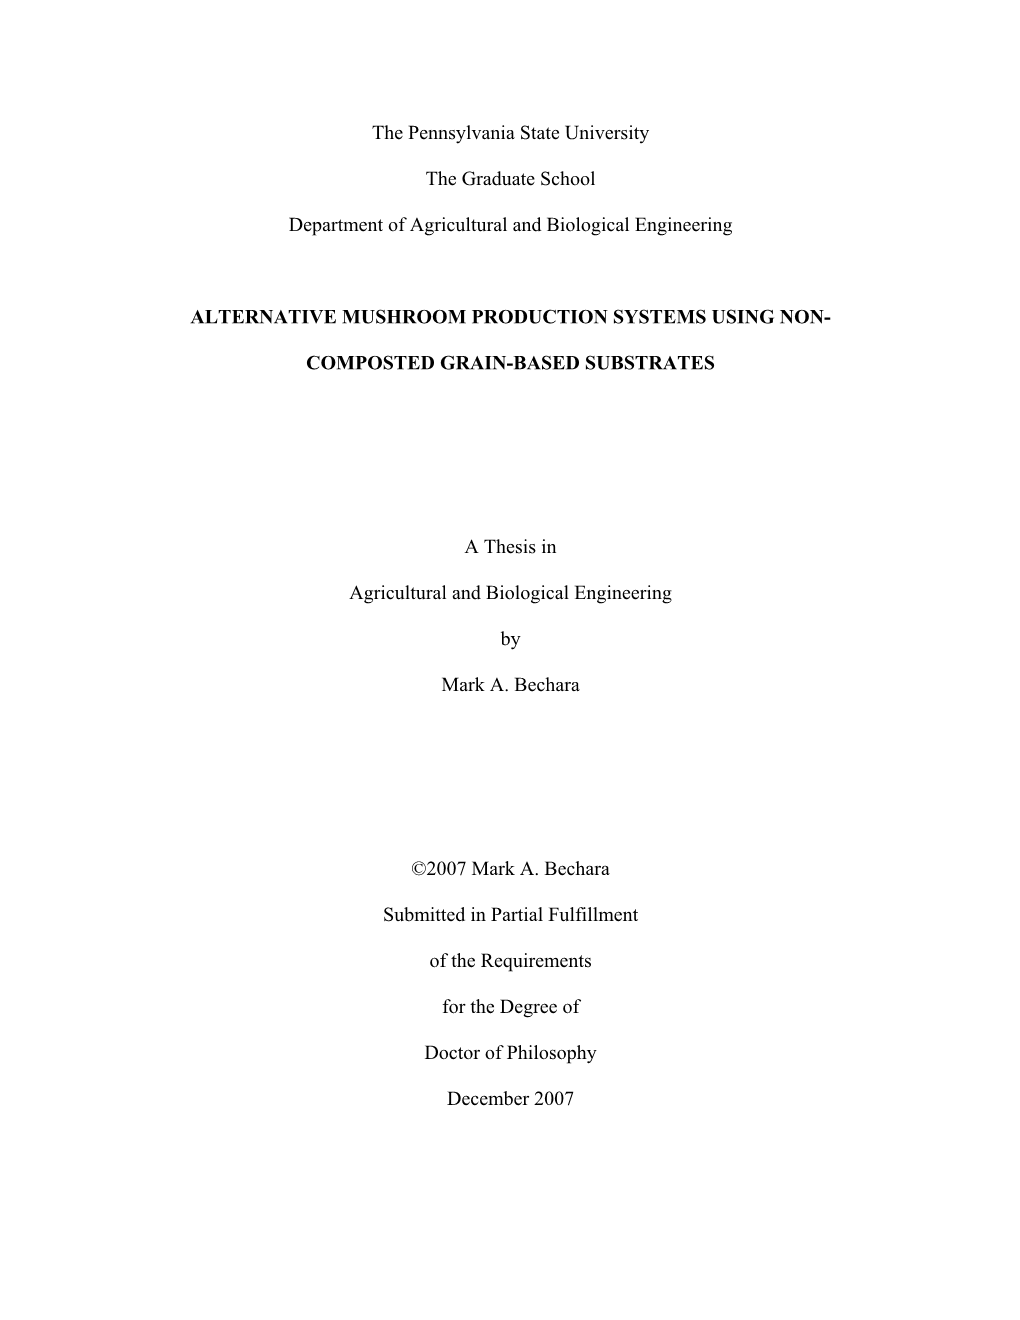 Open Bechara Doctoral Thesis.Pdf